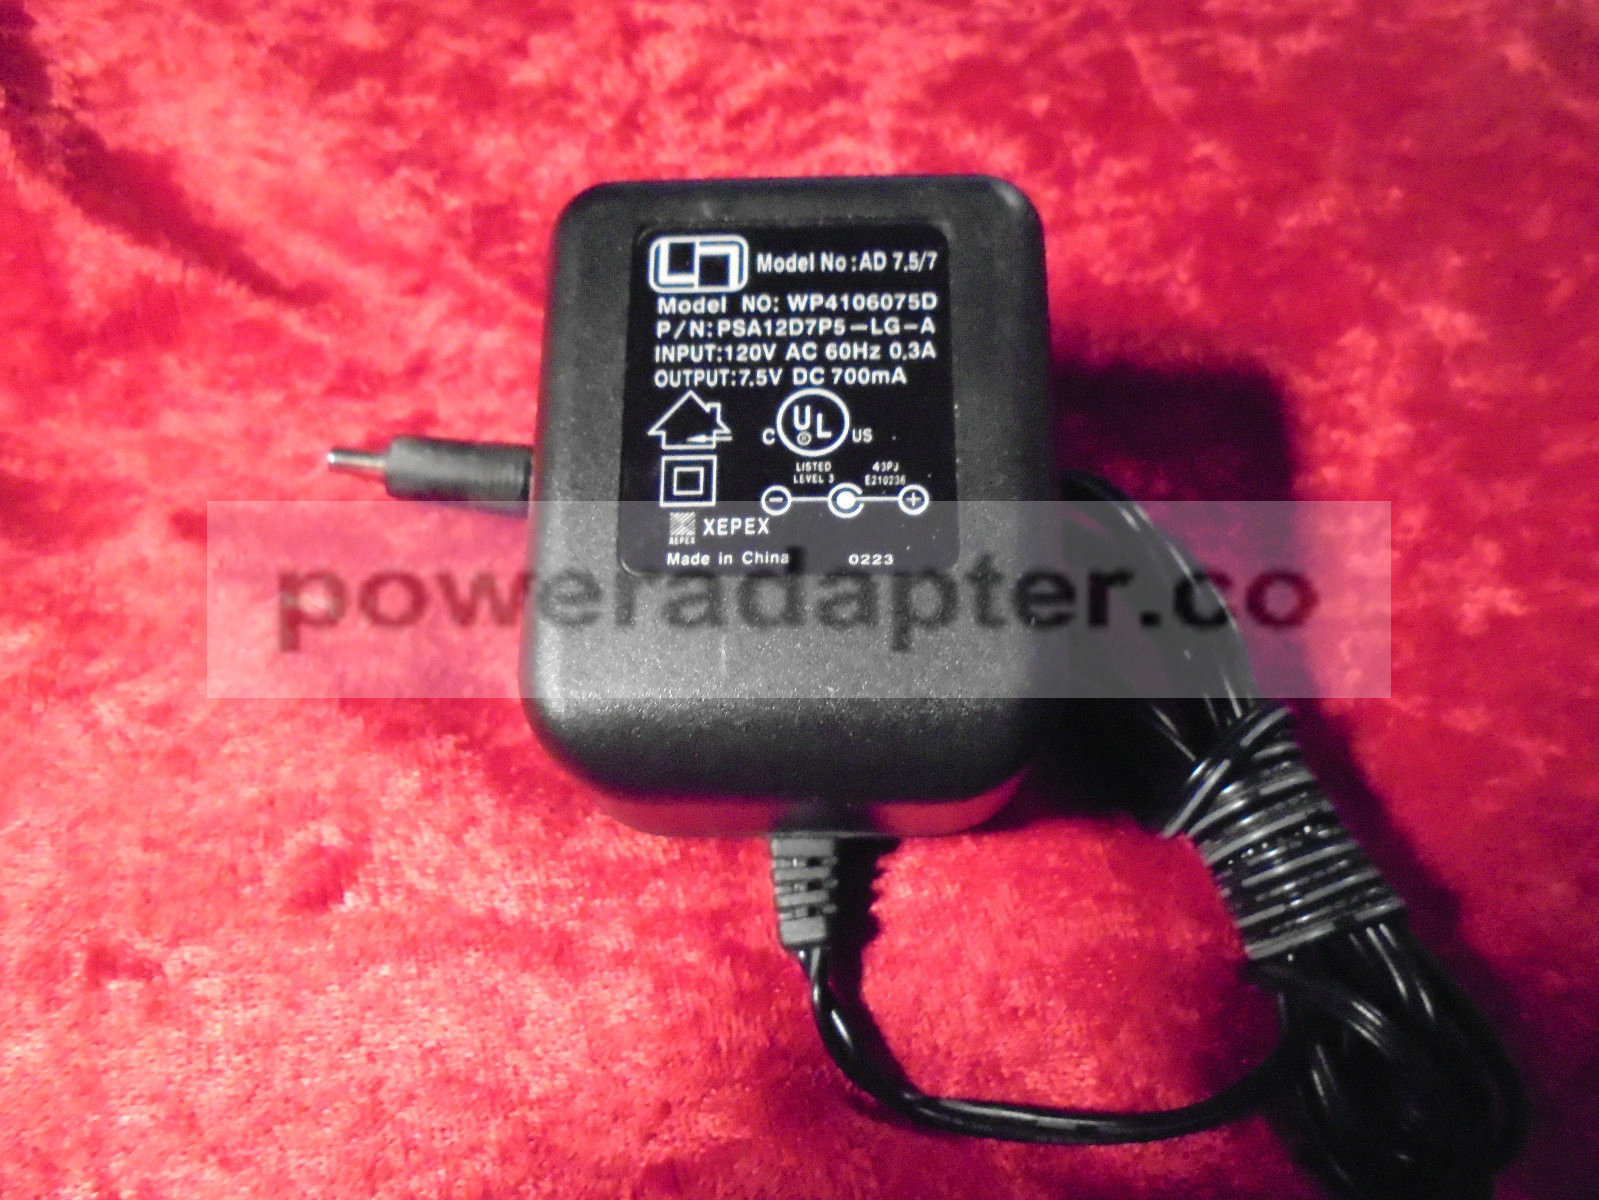 Xepex WP4106075D AD 7.5/7 AC Adapter 7.5VDC 700mA PSA12D7P5-LG-A Condition: Used: An item that has been used previo - Click Image to Close